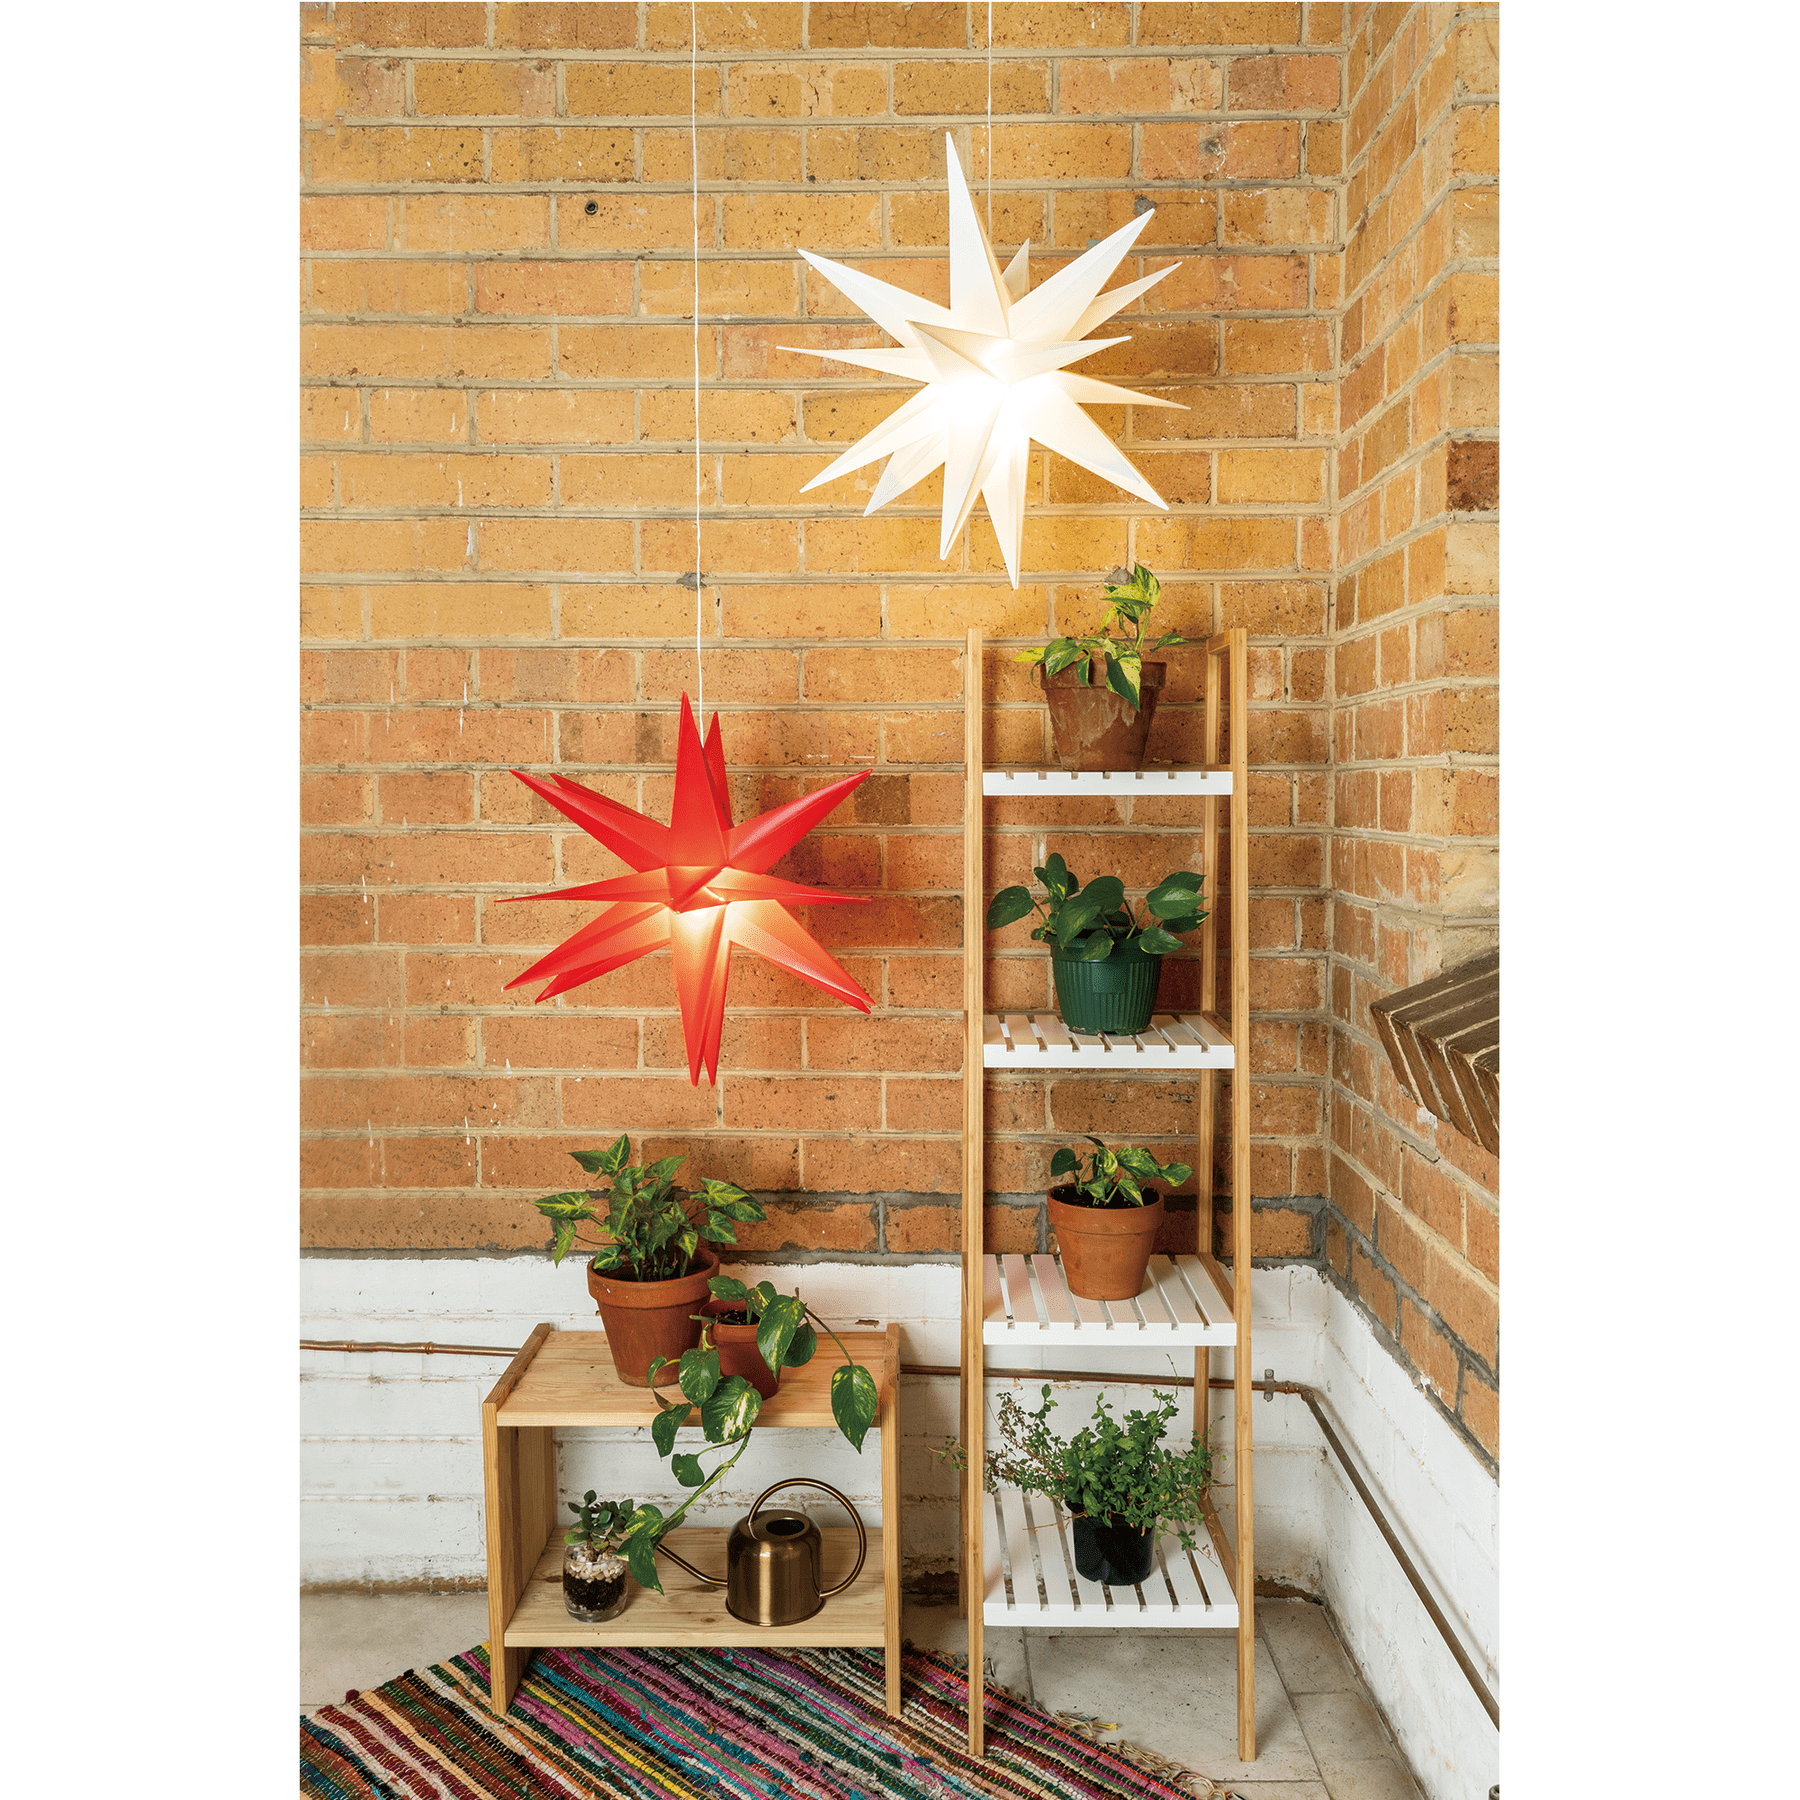 Lexi Lighting Christmas Ceiling&Wall Decoration Starburst Hanging Light - 2 Colour Options